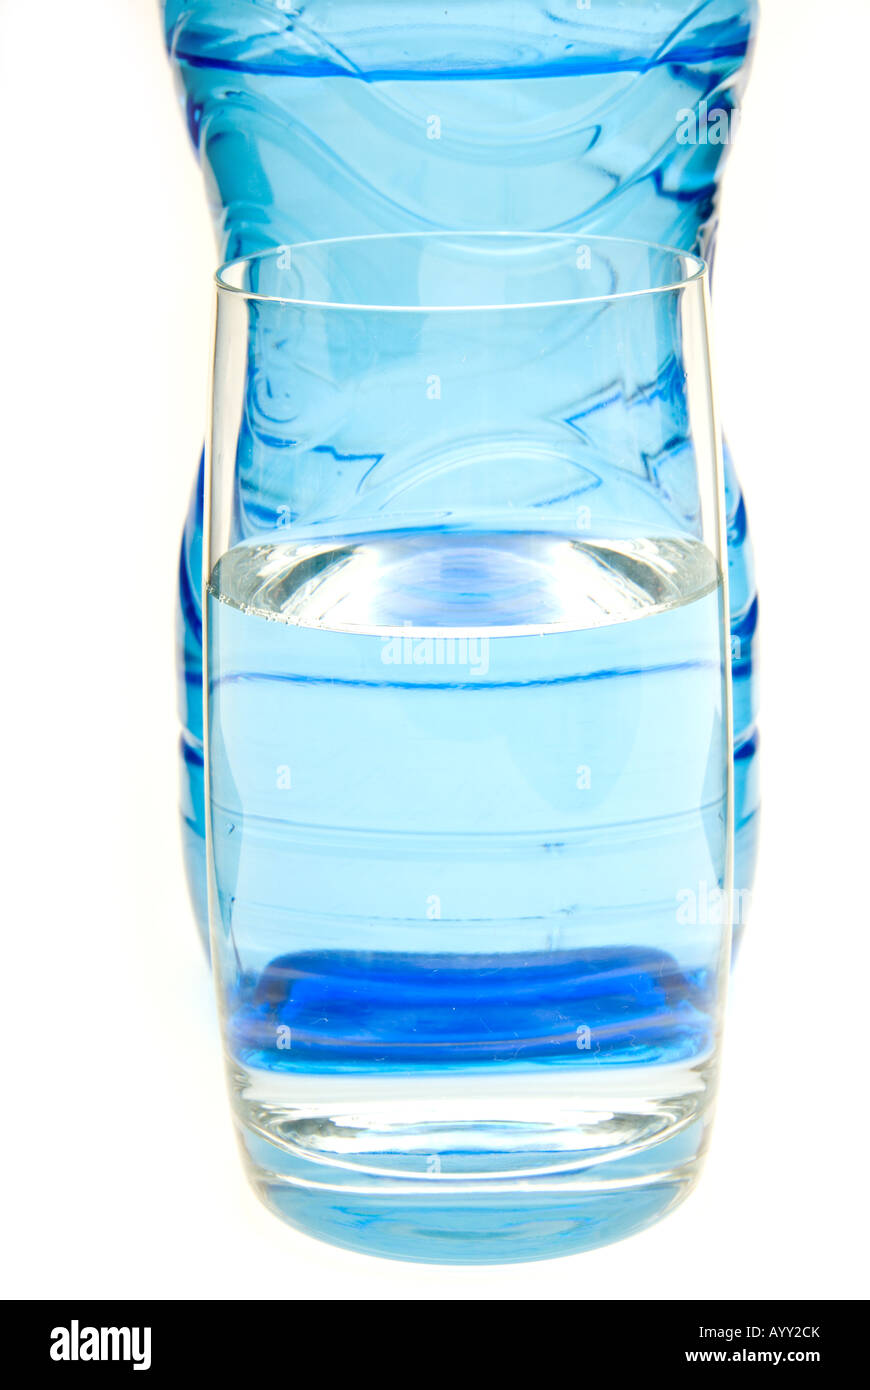 A glass of water in front of a blue bottle Stock Photo